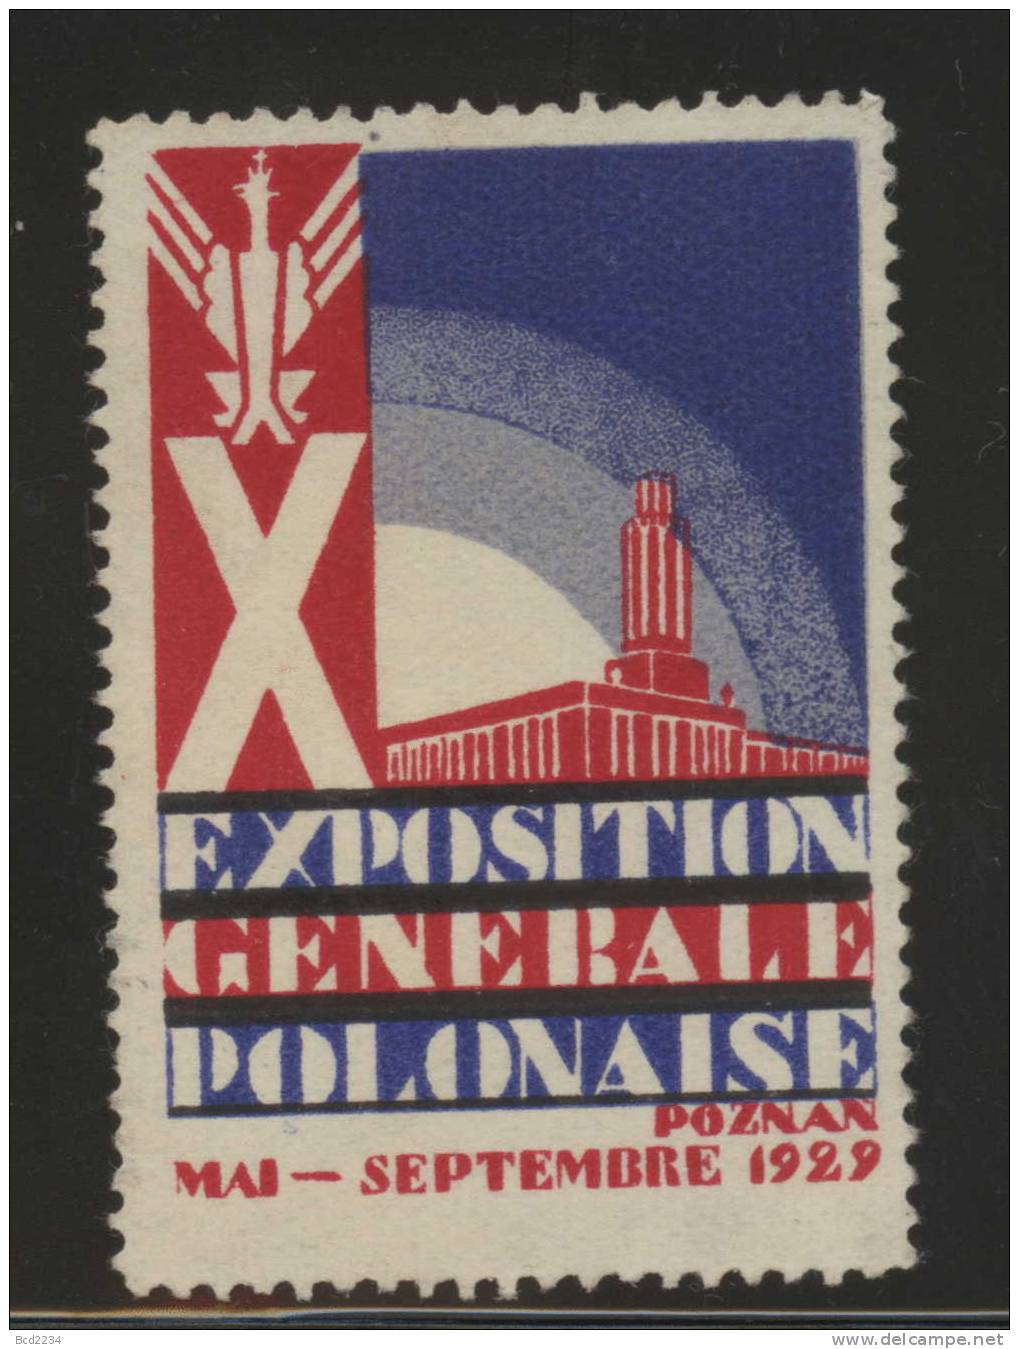 POLAND 1929 POZNAN EXHIBITION TRADE FAIR POSTER STAMP TYPE 5 FRENCH WRITING NO GUM - Fiscaux